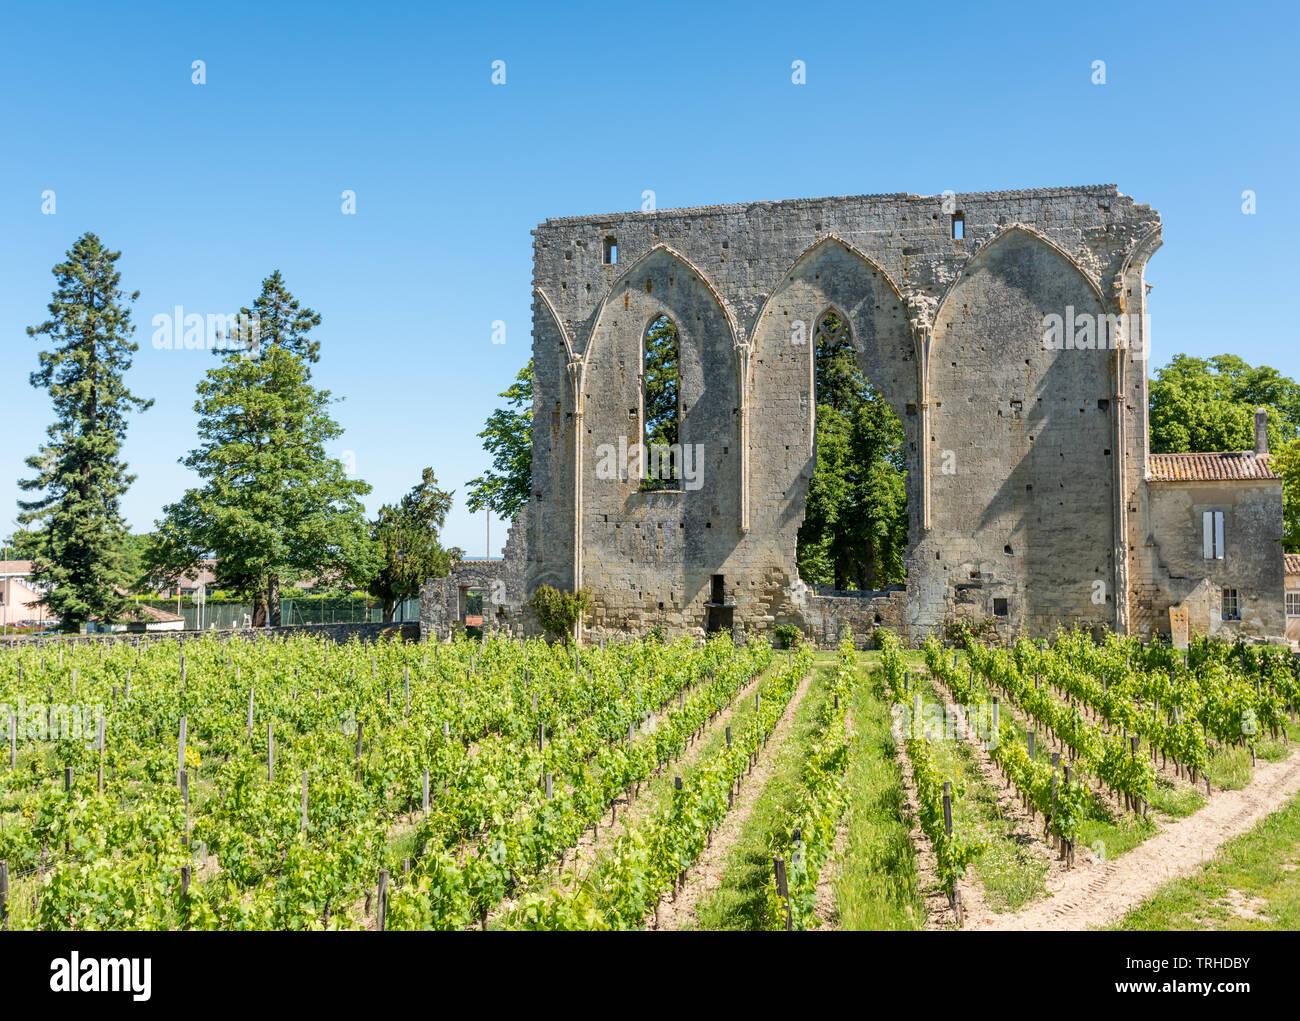 Saint-Emilion (Gironde, France), vineyards and ruins of an abbey in the village Stock Photo